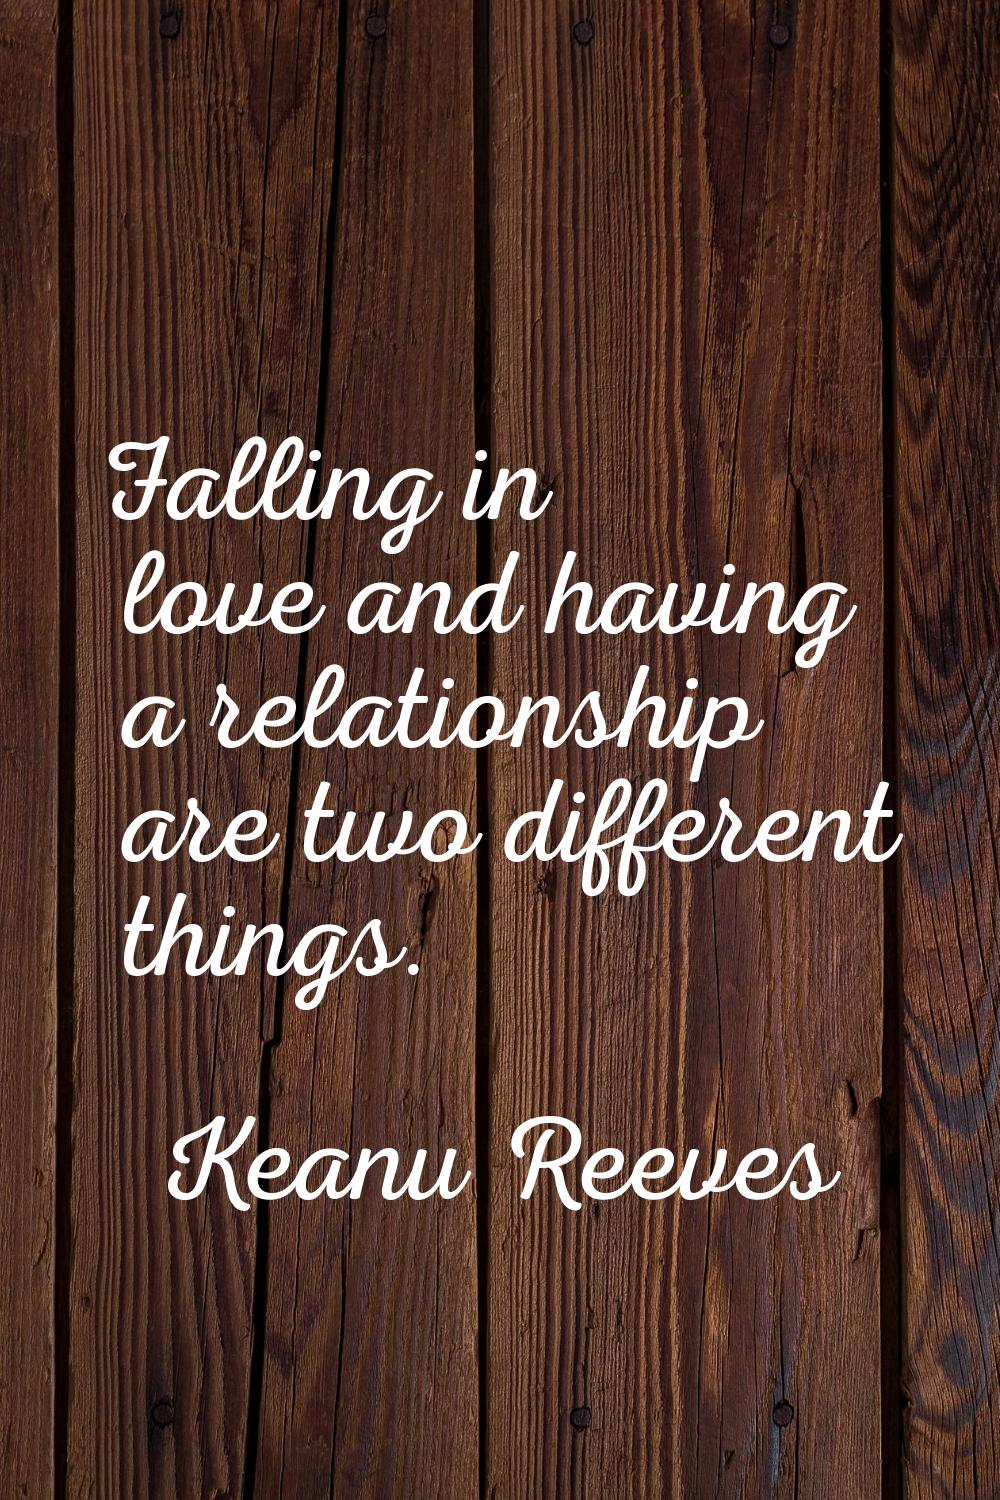 Falling in love and having a relationship are two different things.